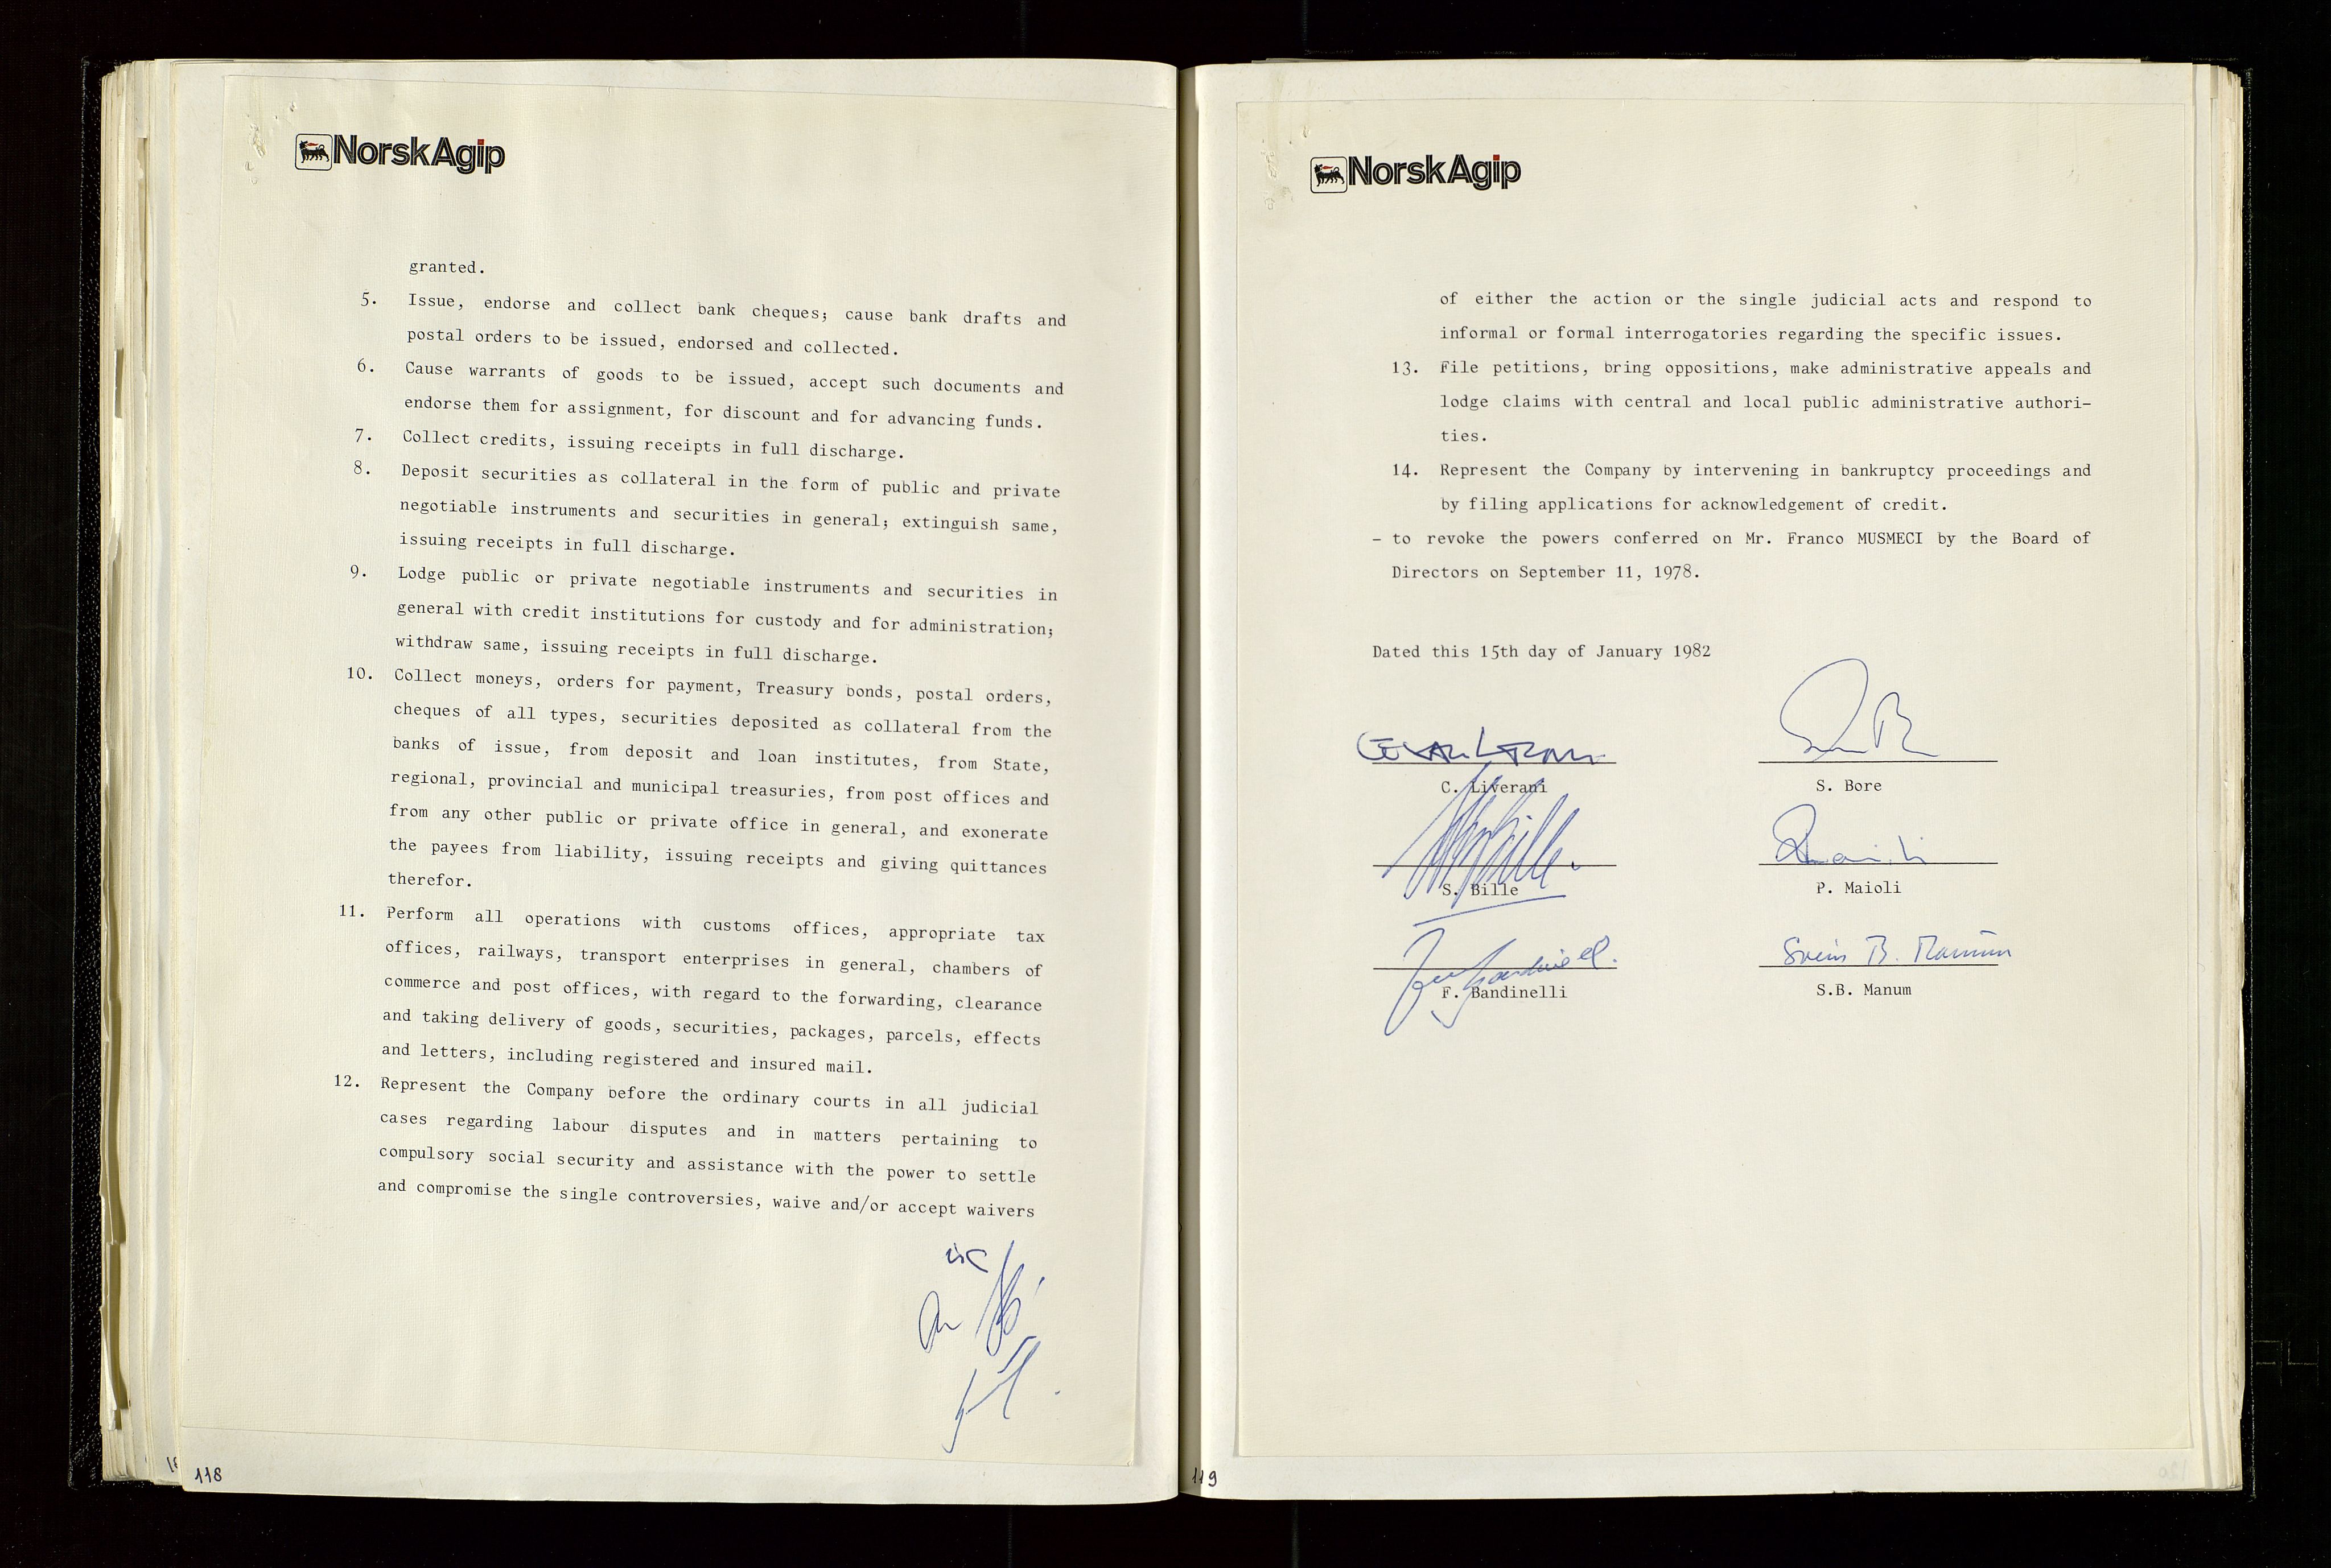 Pa 1583 - Norsk Agip AS, SAST/A-102138/A/Aa/L0003: Board of Directors meeting minutes, 1979-1983, s. 118-119